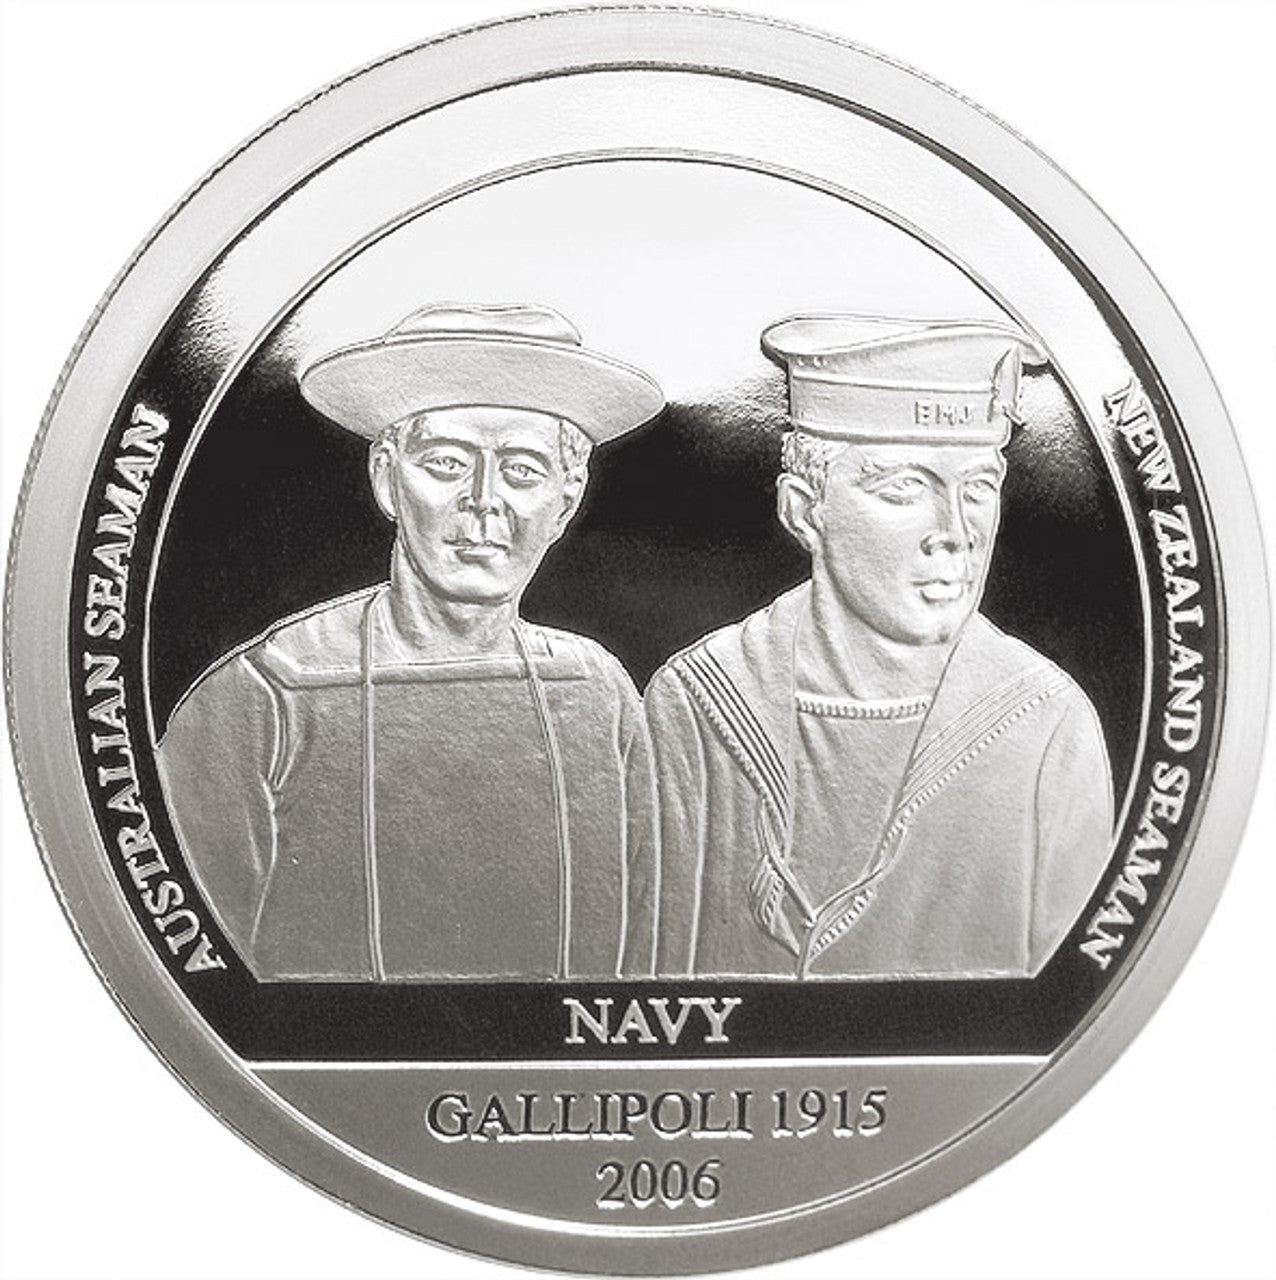 Introducing the Sands of Gallipoli 2006 release Our People Limited Edition Medallion Set, a truly spectacular collection from the military specialists. This limited edition set contains all six medallions from the Our People - Their Service collection, making it a must-have for any military enthusiast or collector. www.defenceqstore.com.au